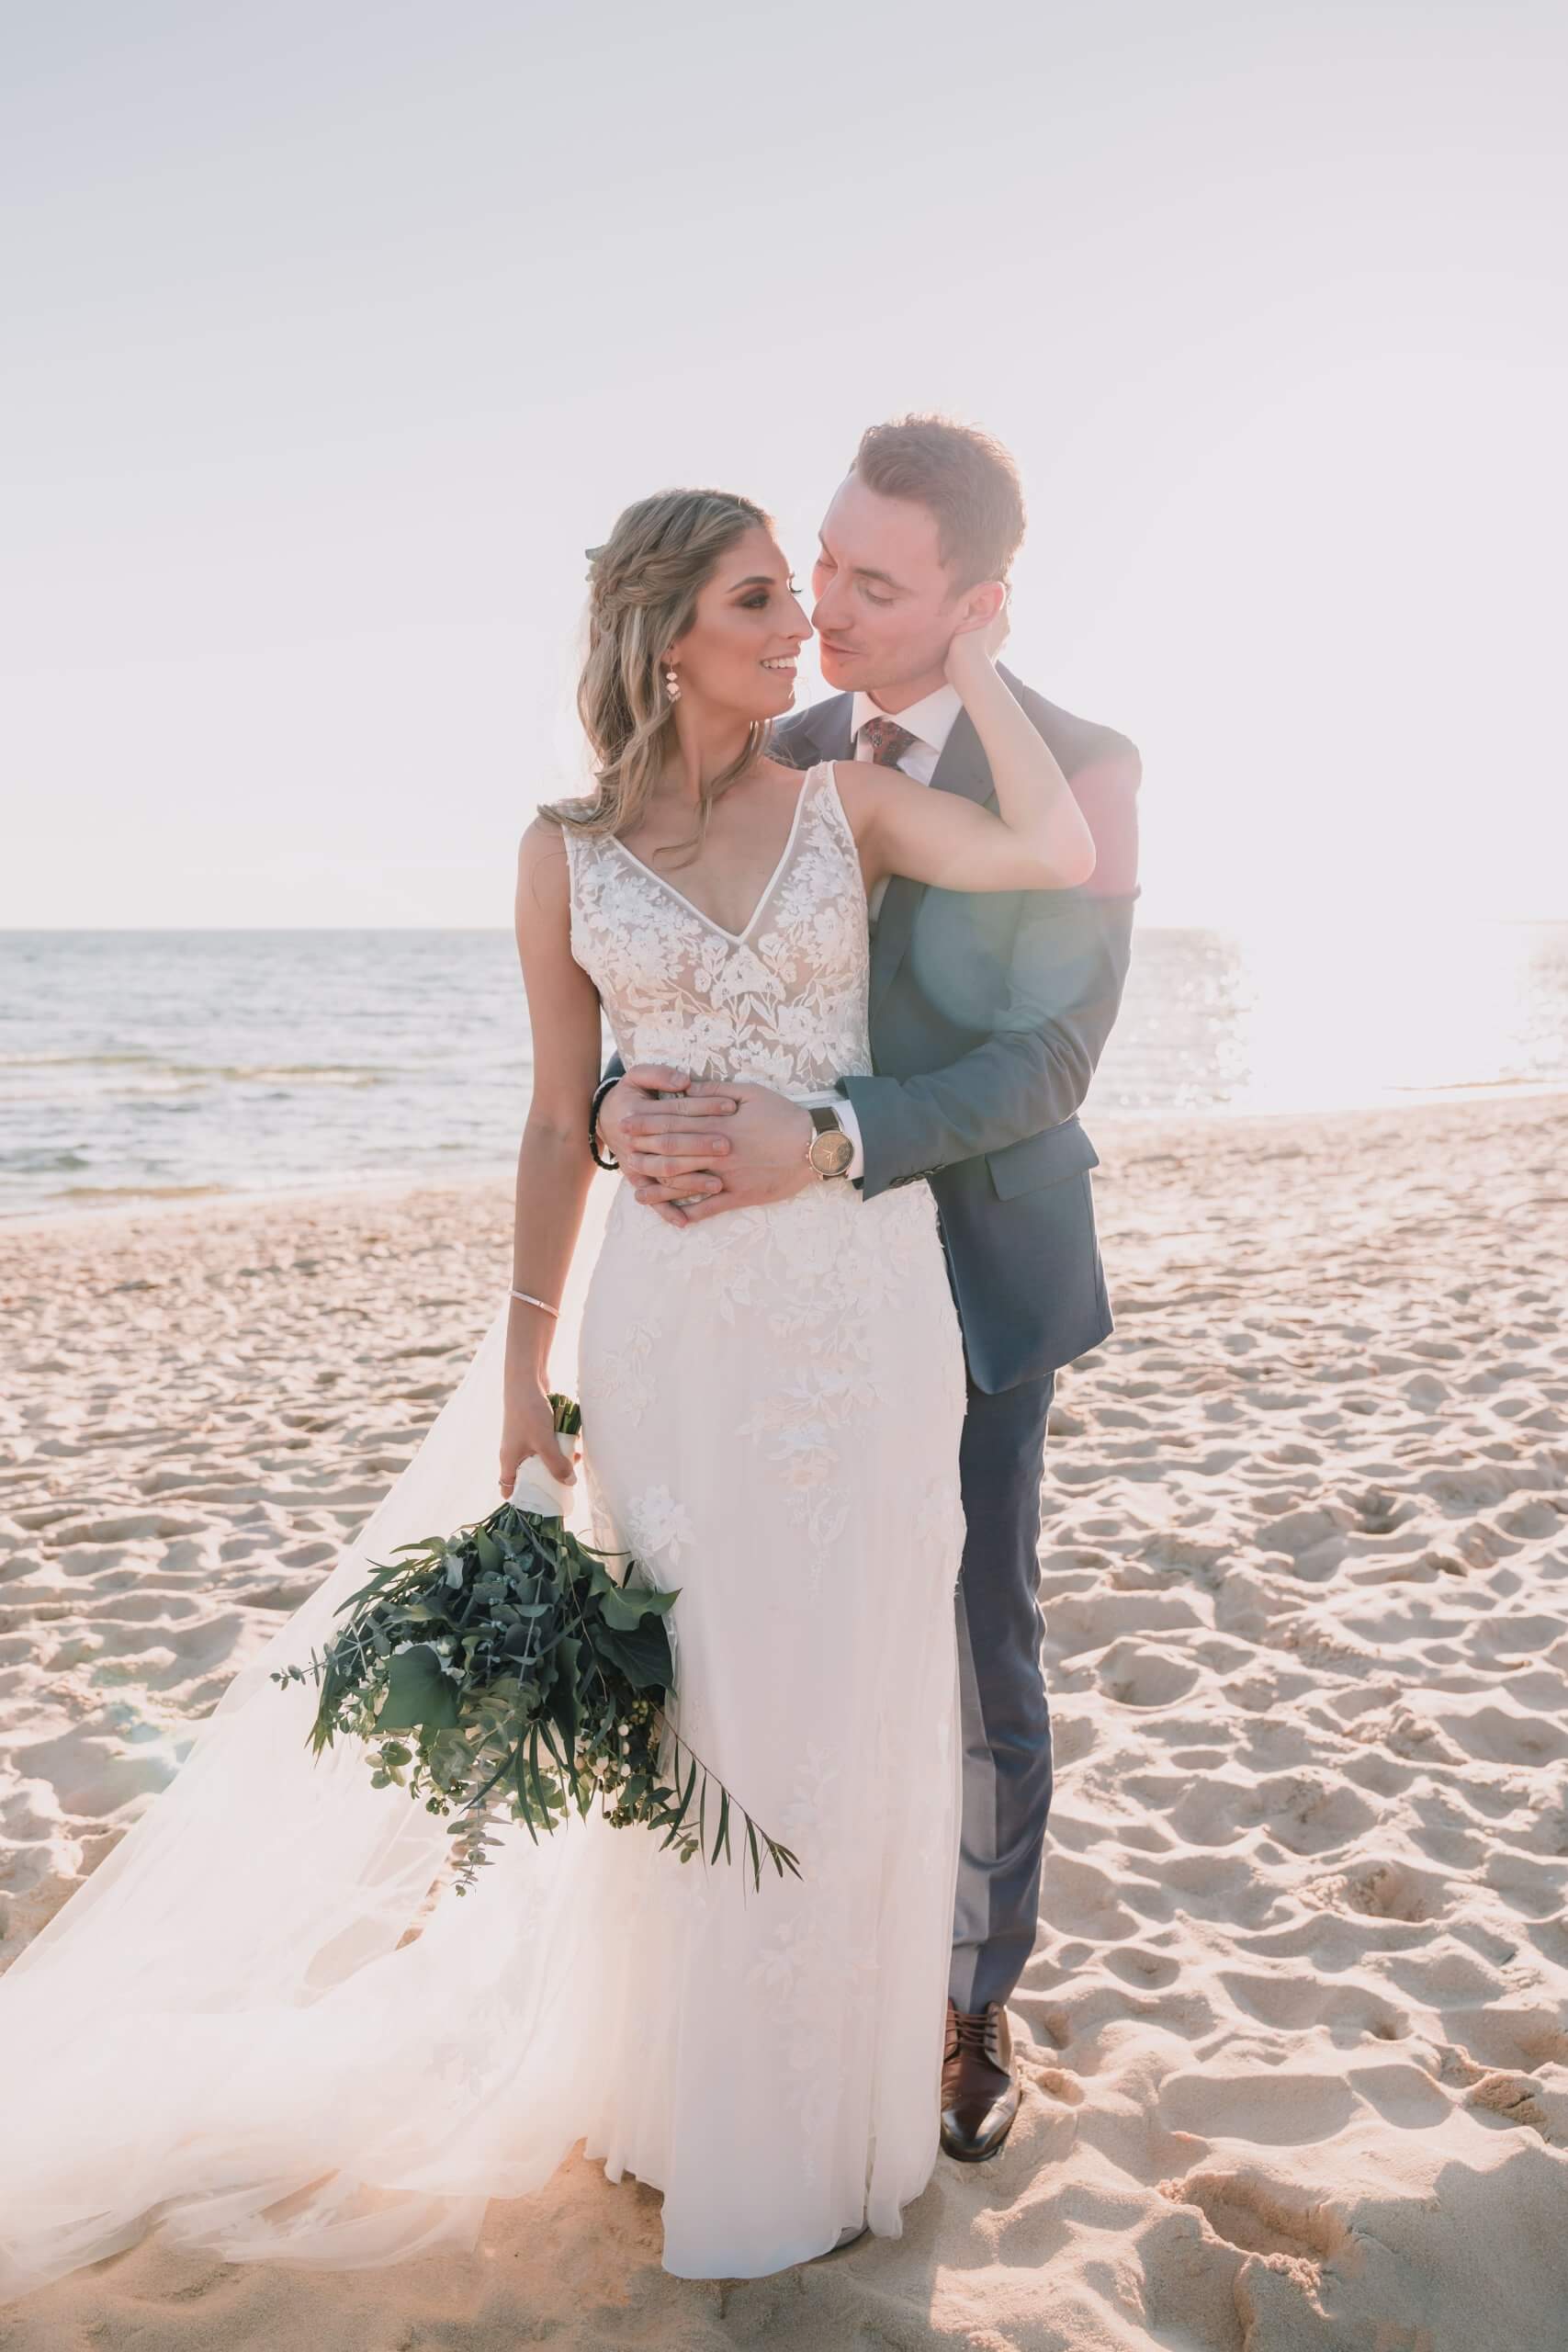 White sand, the setting sun, and the calm waters create a beautiful backdrop for the groom who embraces his bride with both ands on her waist.